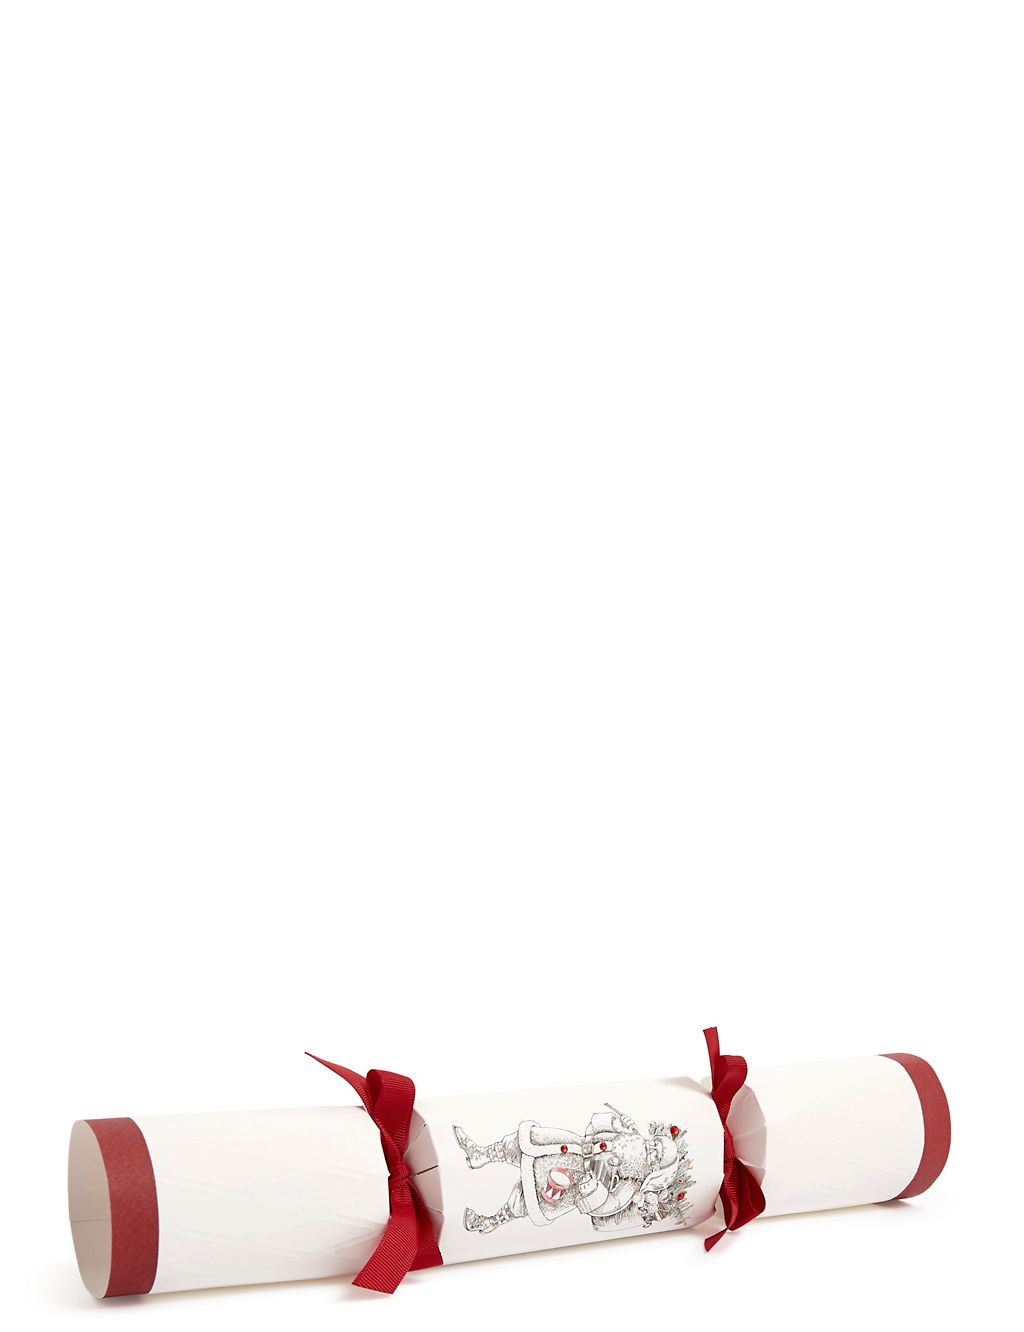 Luxury Santa and Tree Christmas Crackers Pack of 8 2 of 5